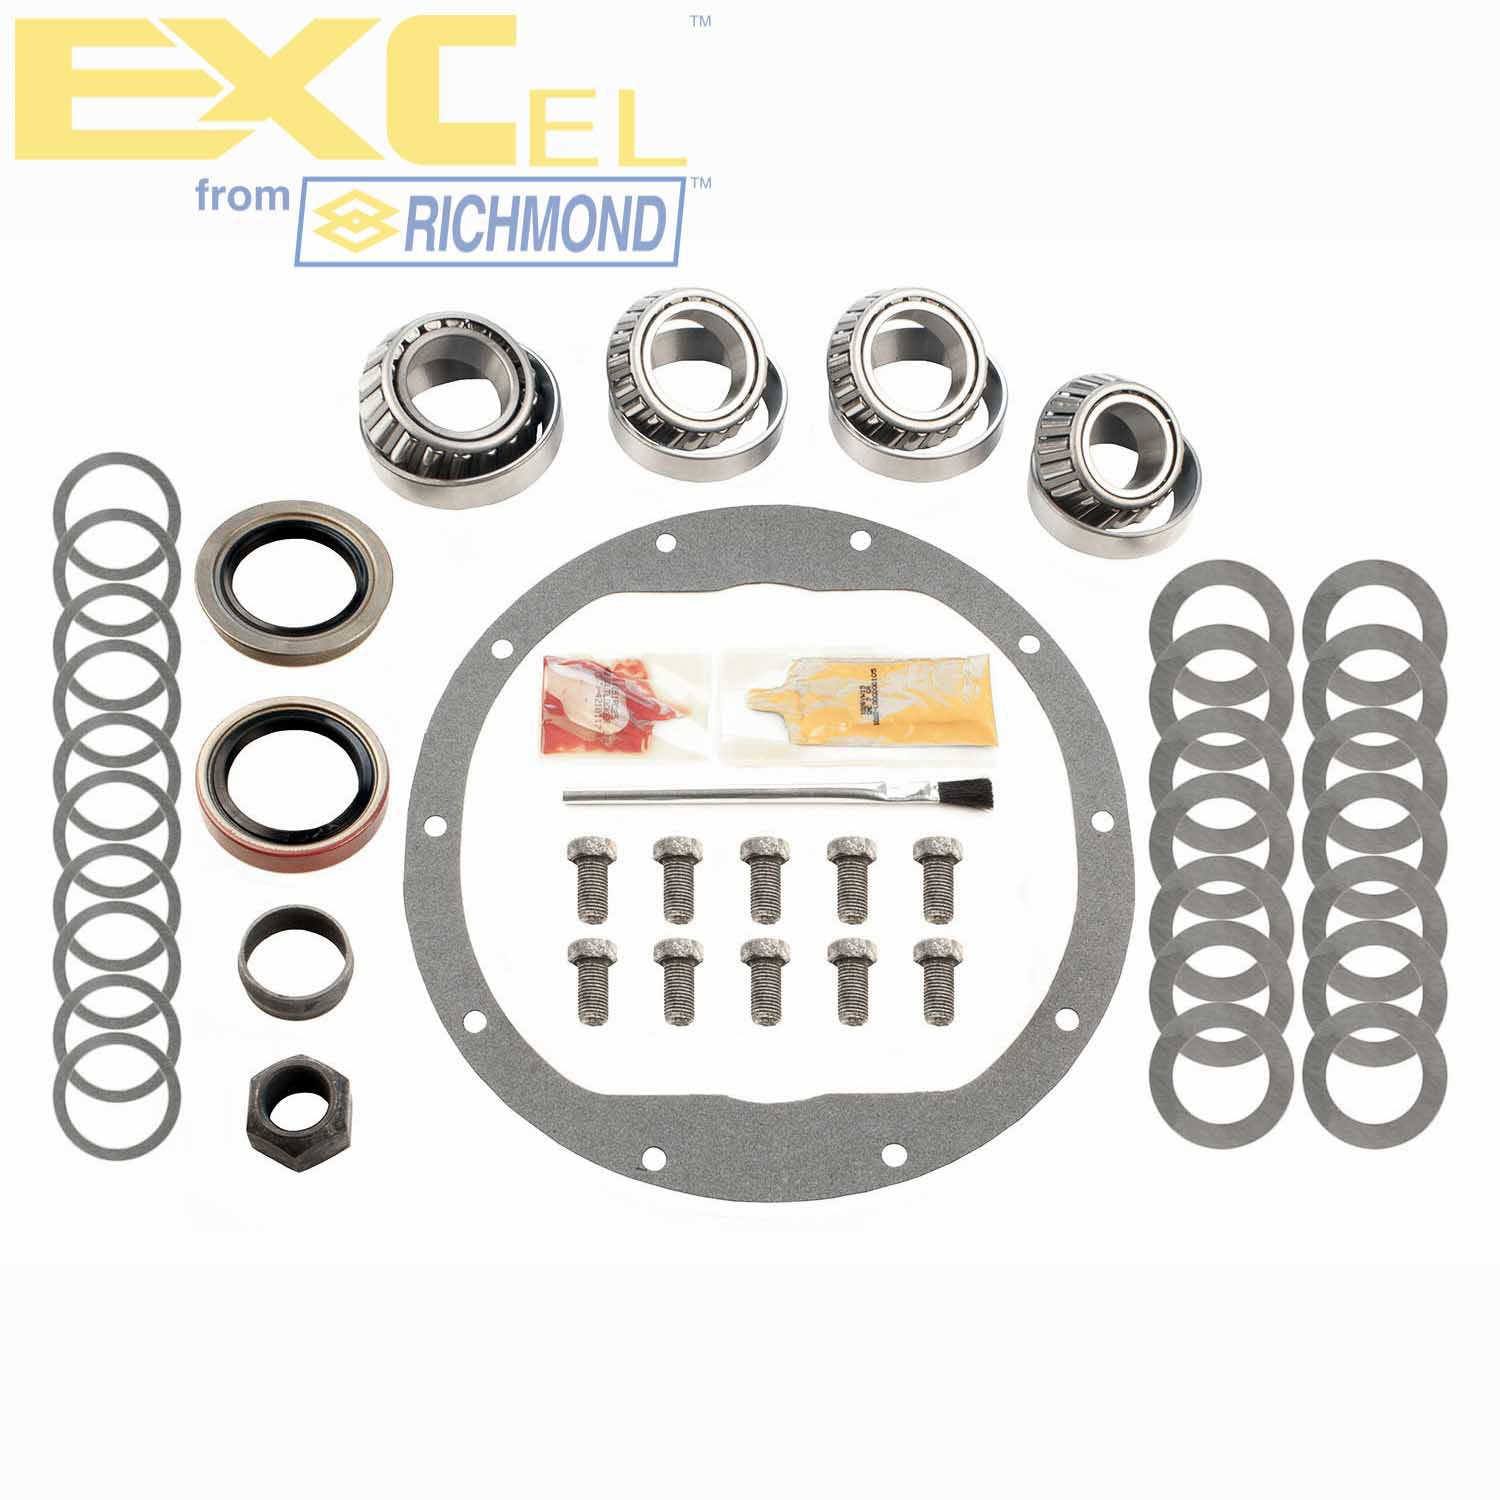 Excel XL-1021-1 Differential Bearing Kit